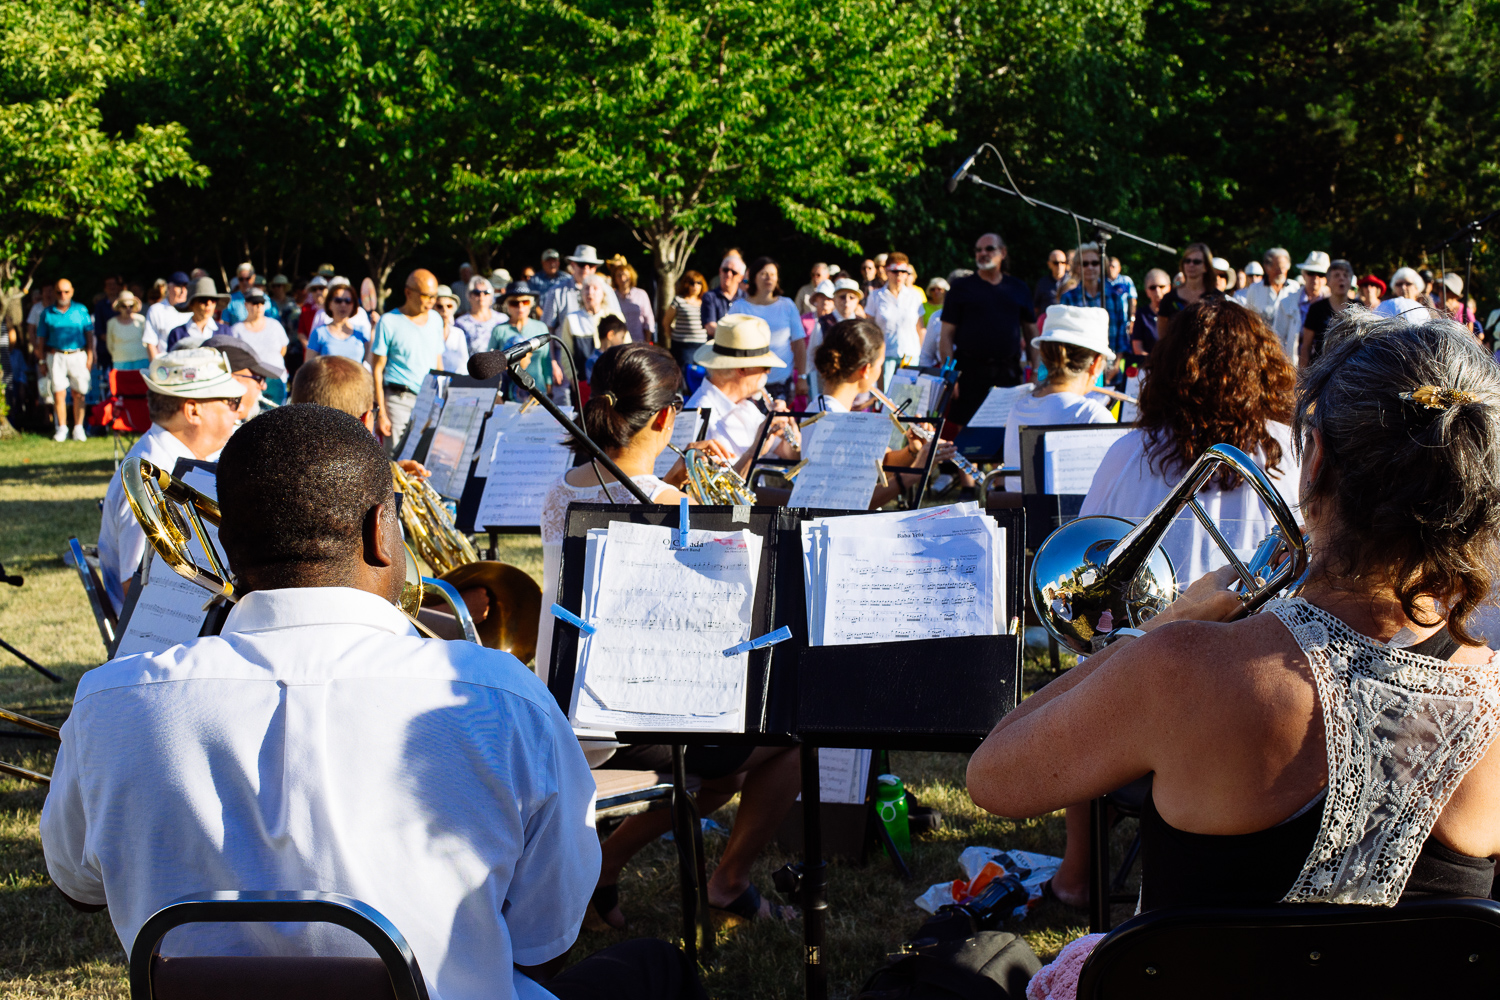 Musicians are seated while playing instruments and reading music, a large audience looks on.